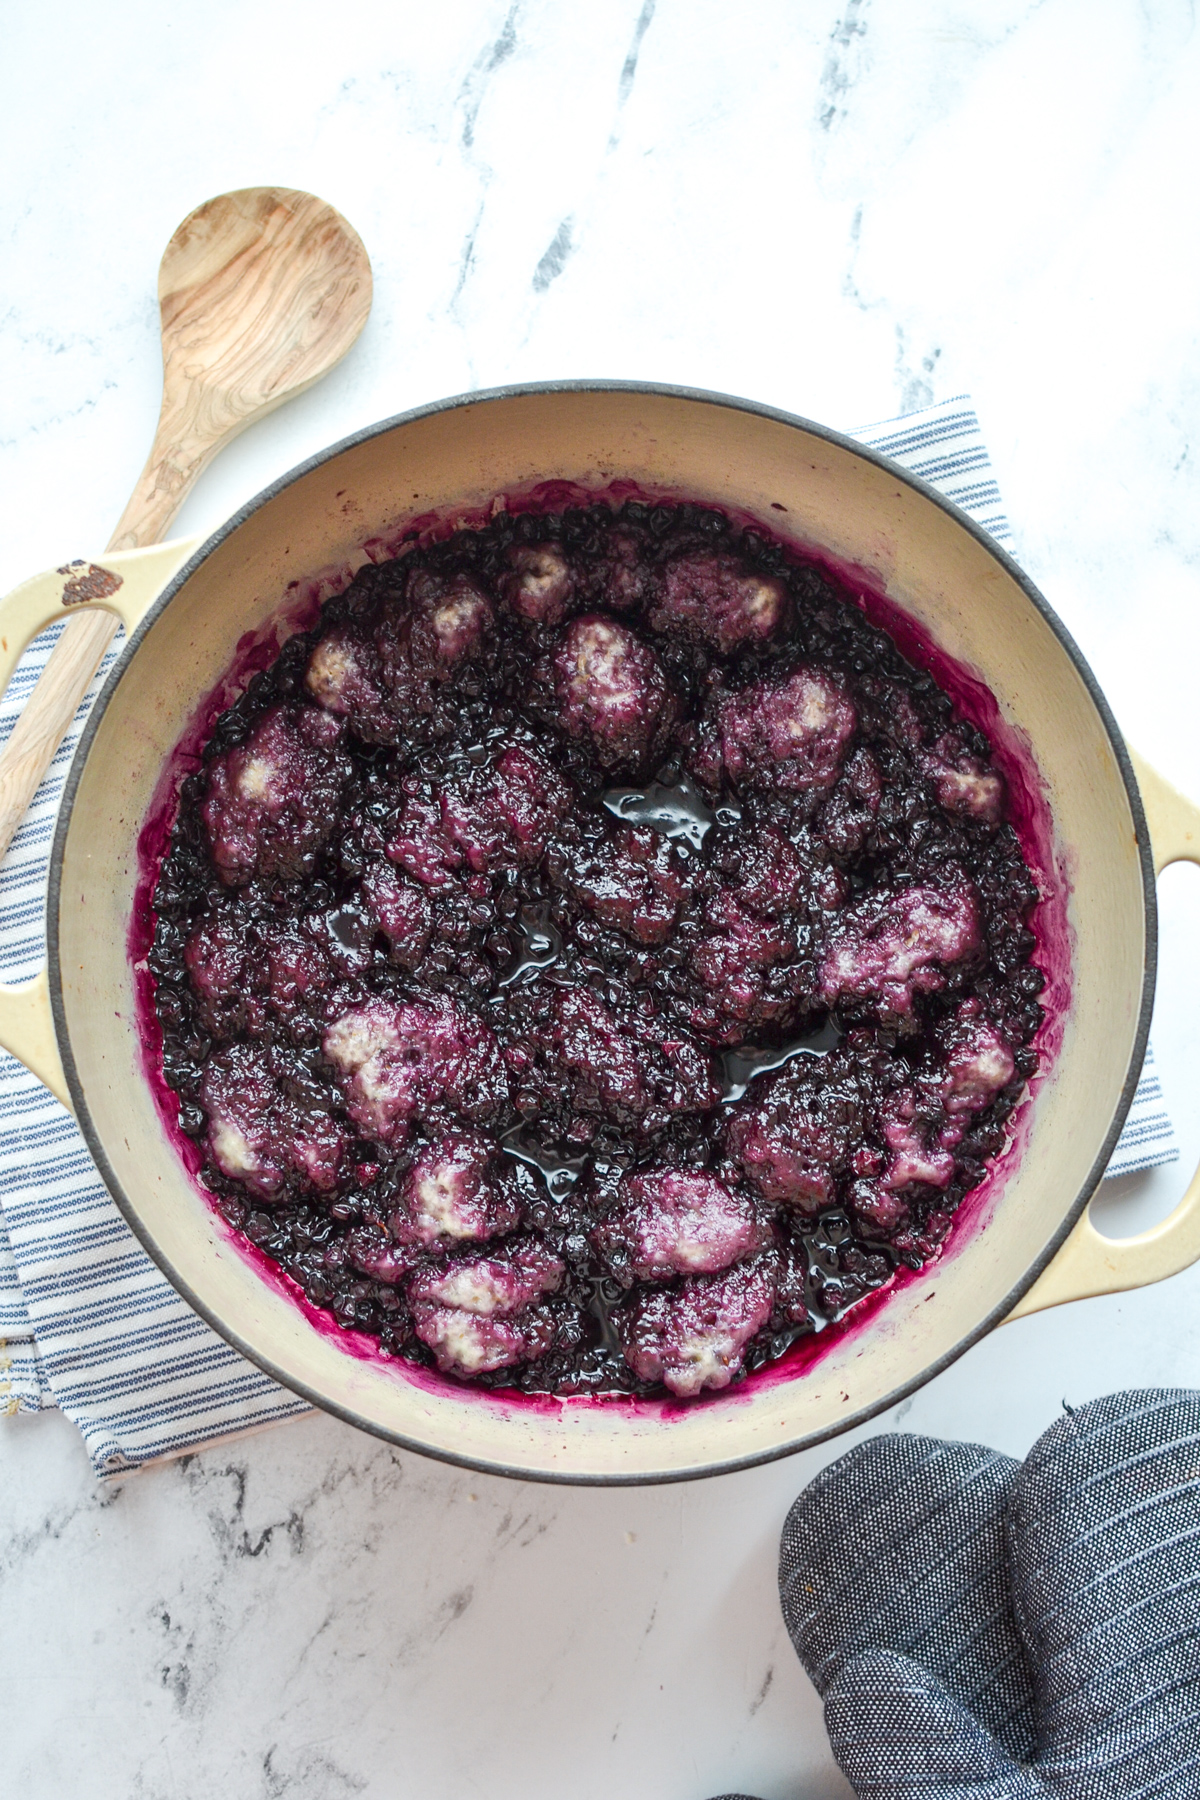 A Dutch Oven filled with blueberries and dumplings.